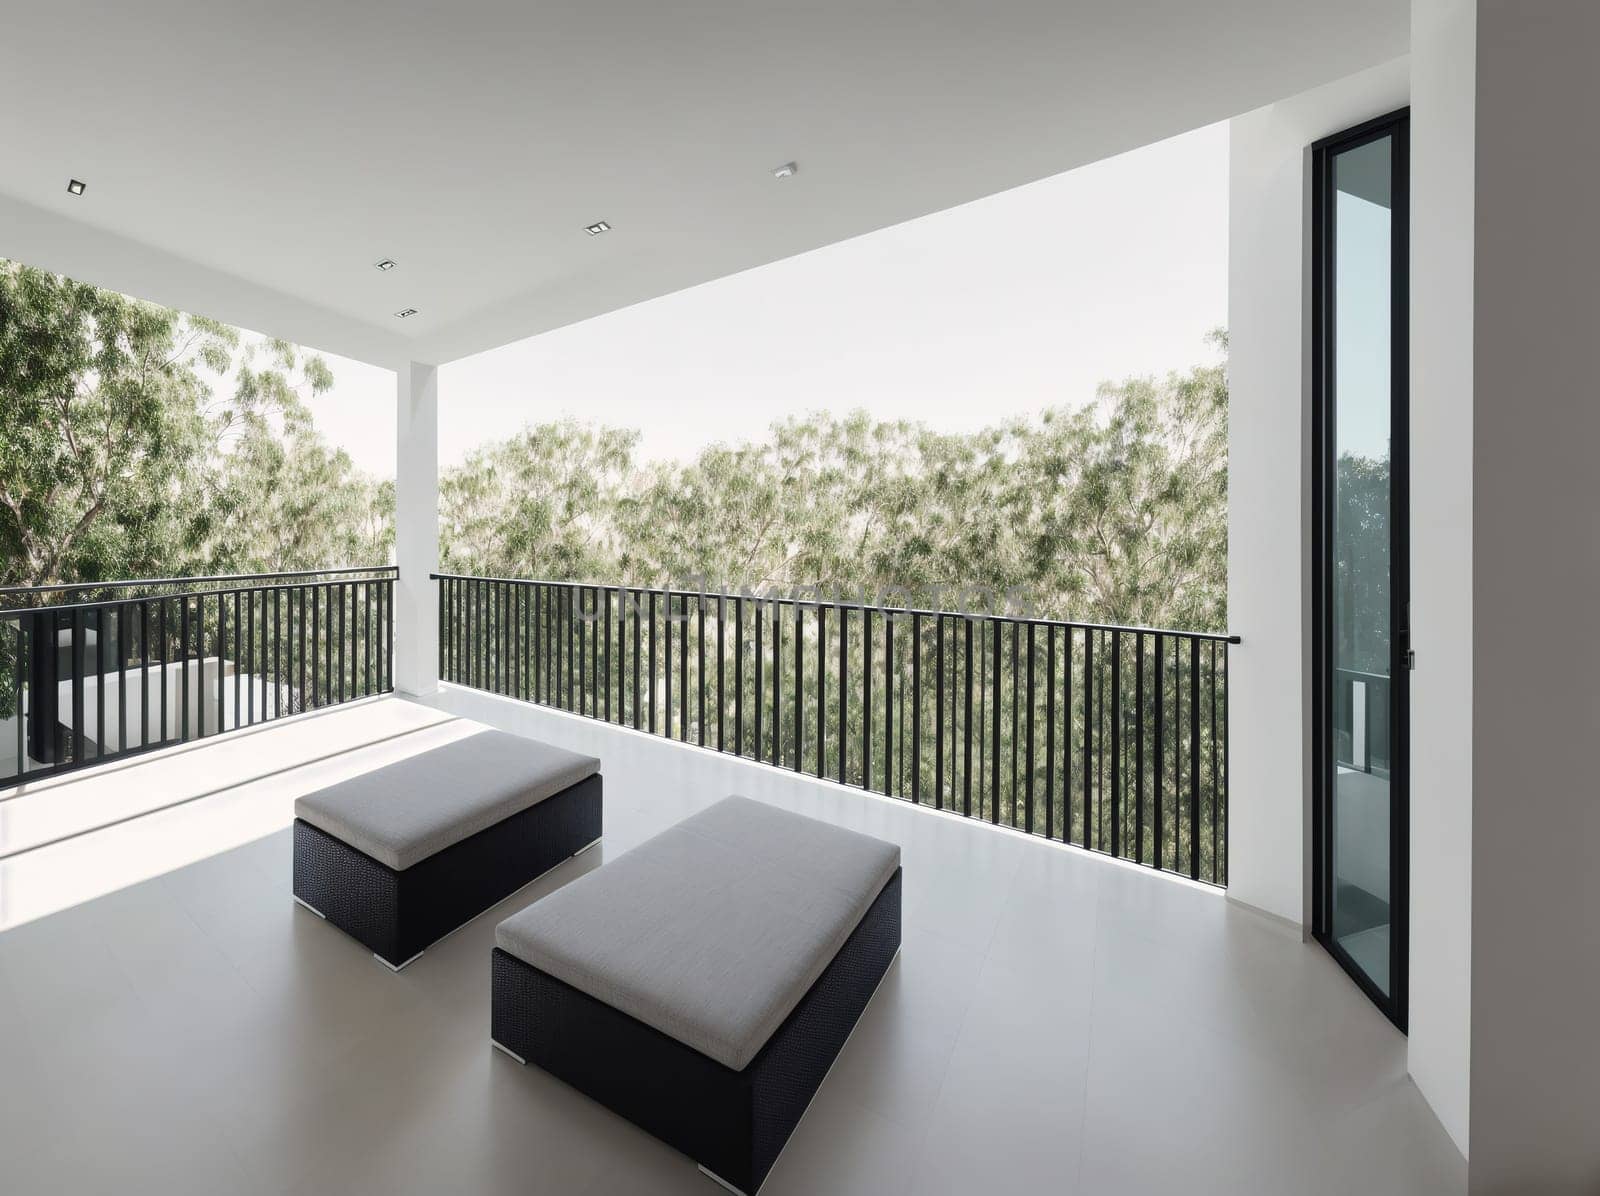 The image shows a balcony with two white couches and a view of the trees in the background.